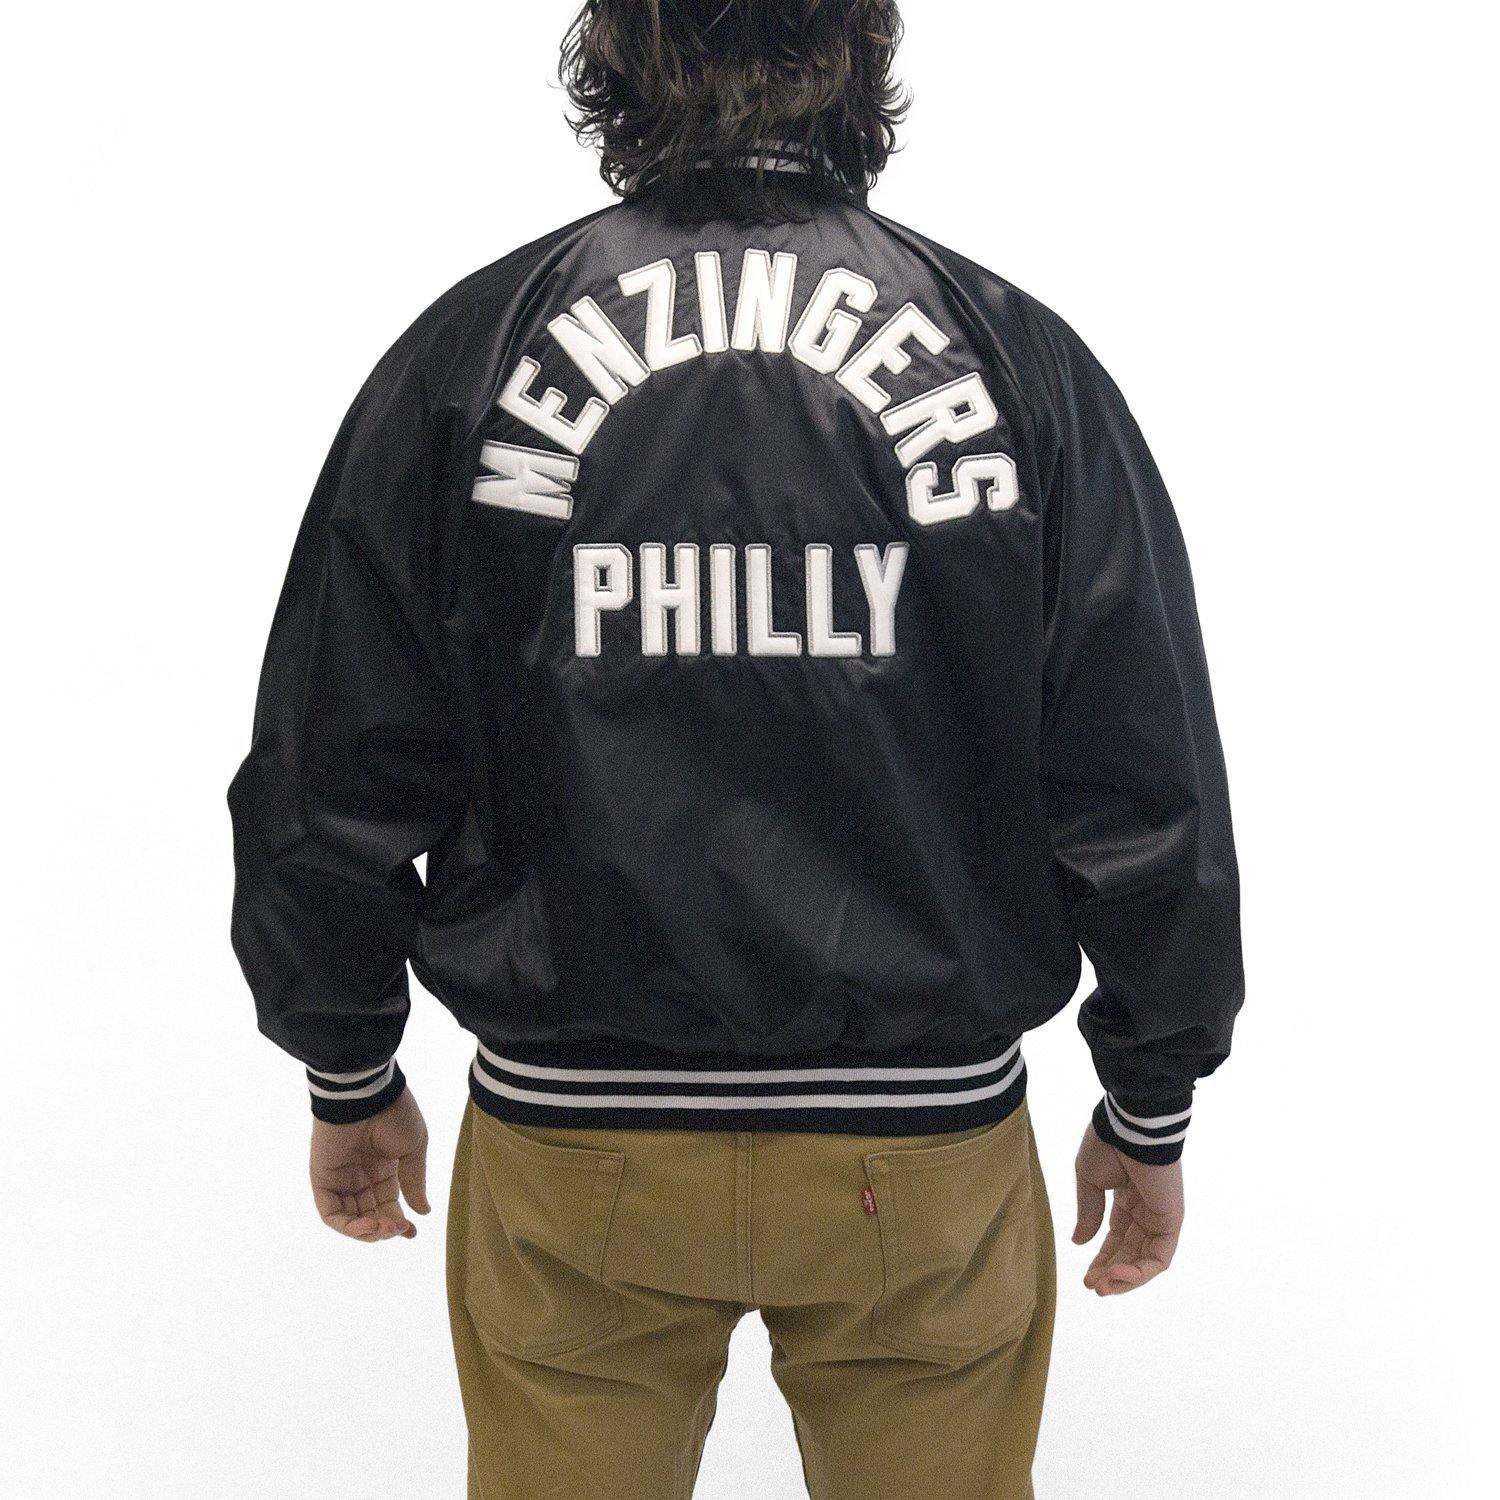 Buy – The Menzingers "Philly Varsity" Jacket – Band & Music Merch – Cold Cuts Merch